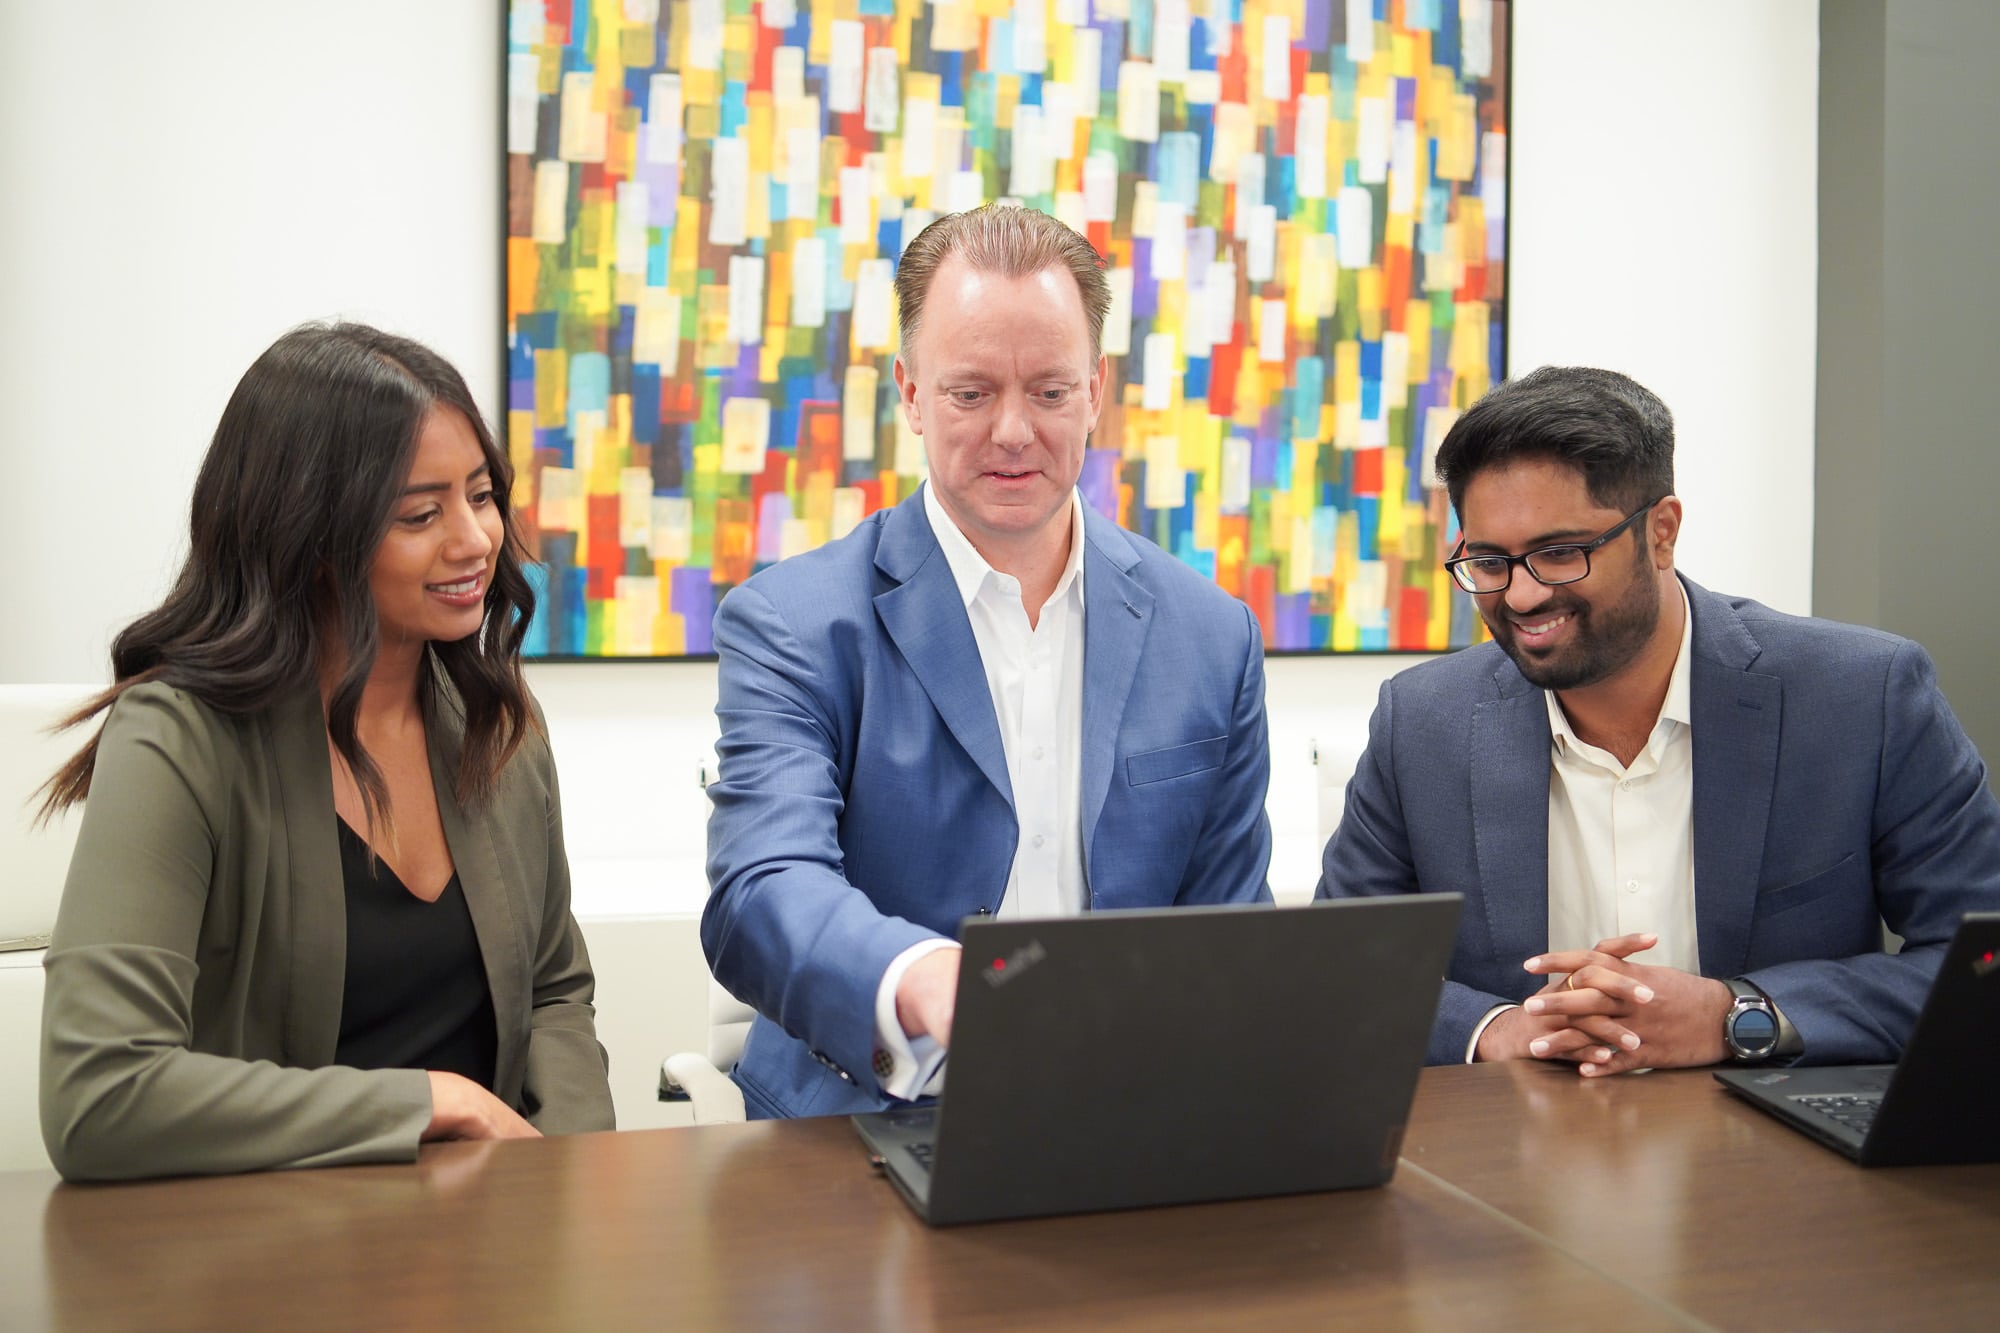 Three team members work together on a laptop. Behind them is a colourful abstract painting.